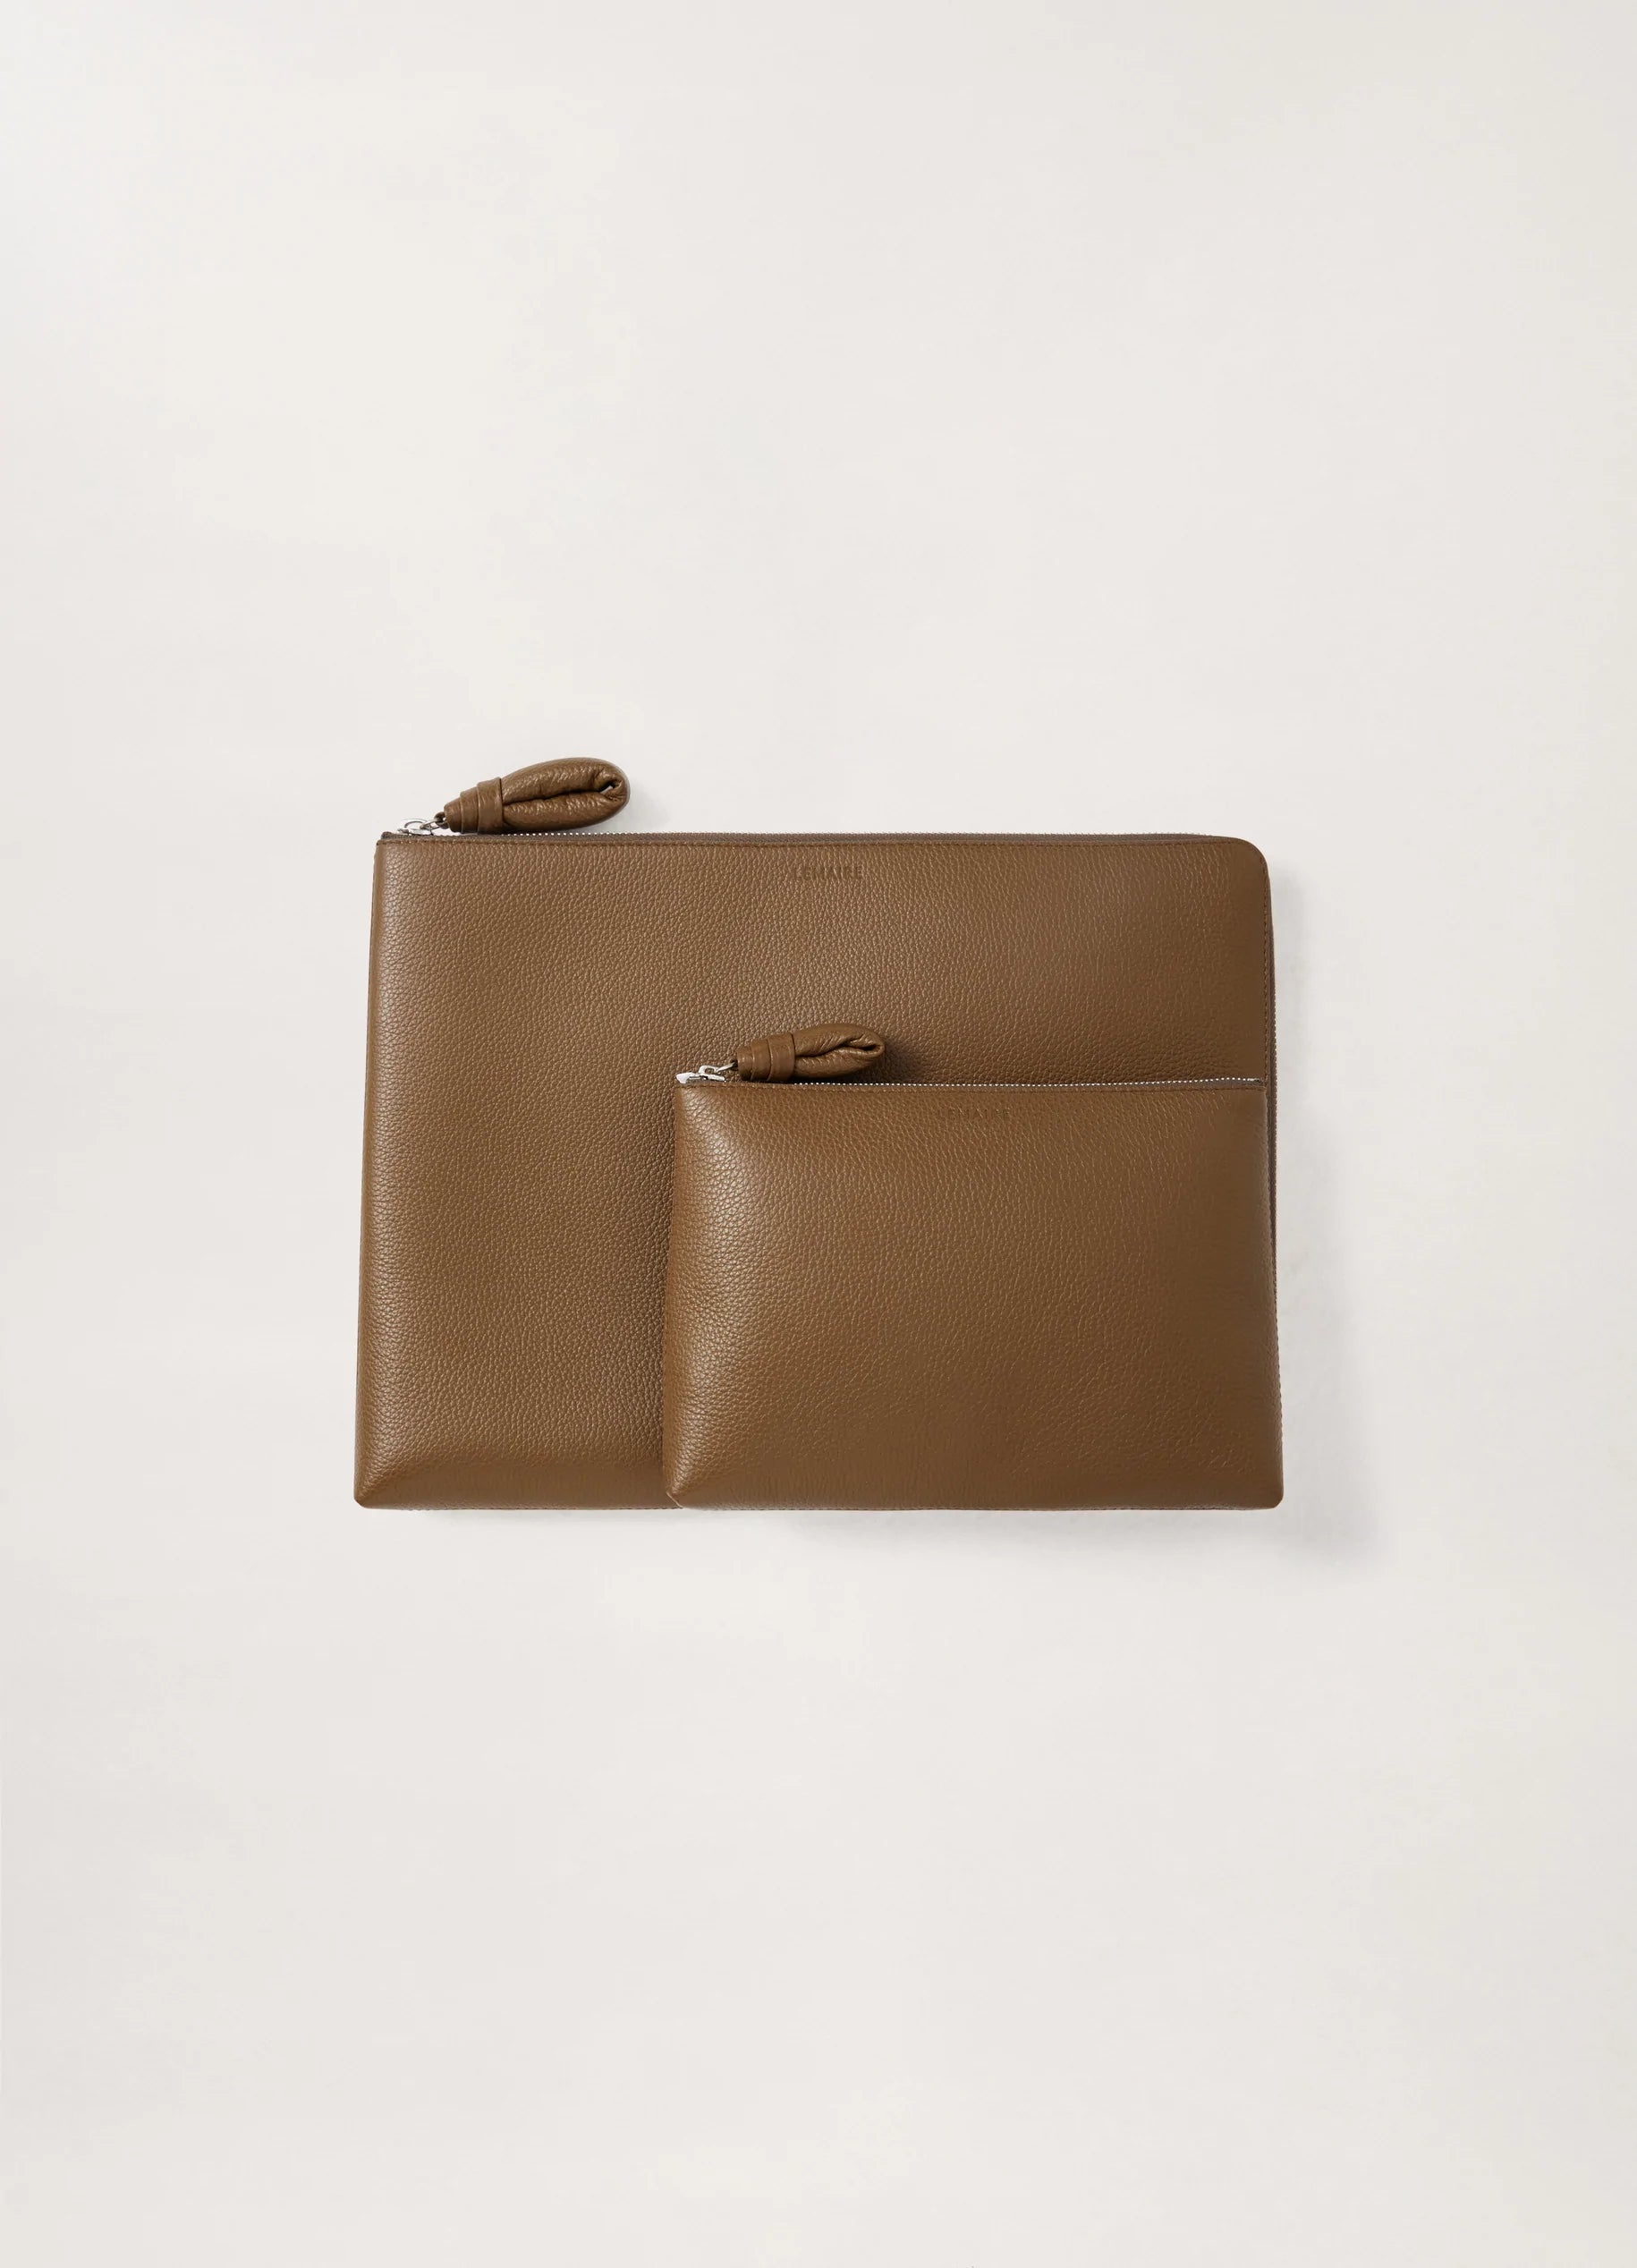 DOCUMENT HOLDER
SOFT GRAINED LEATHER - 2